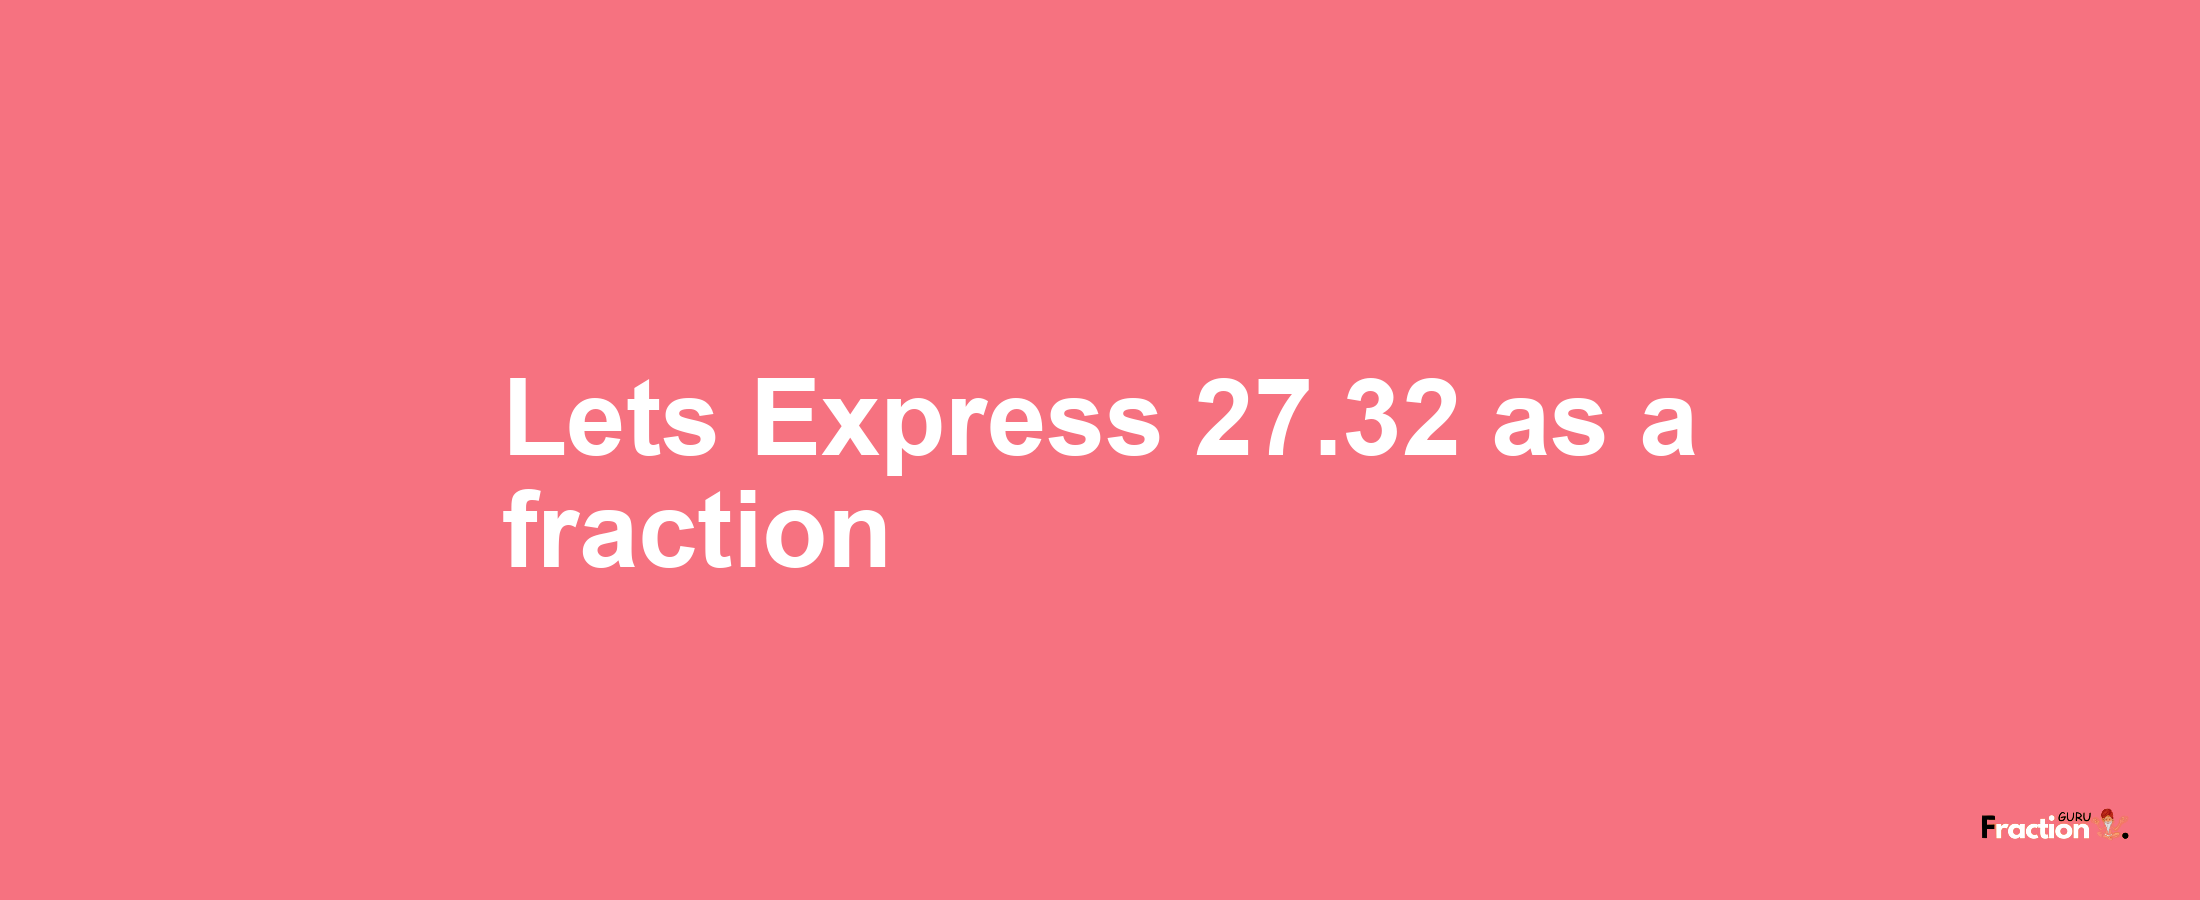 Lets Express 27.32 as afraction